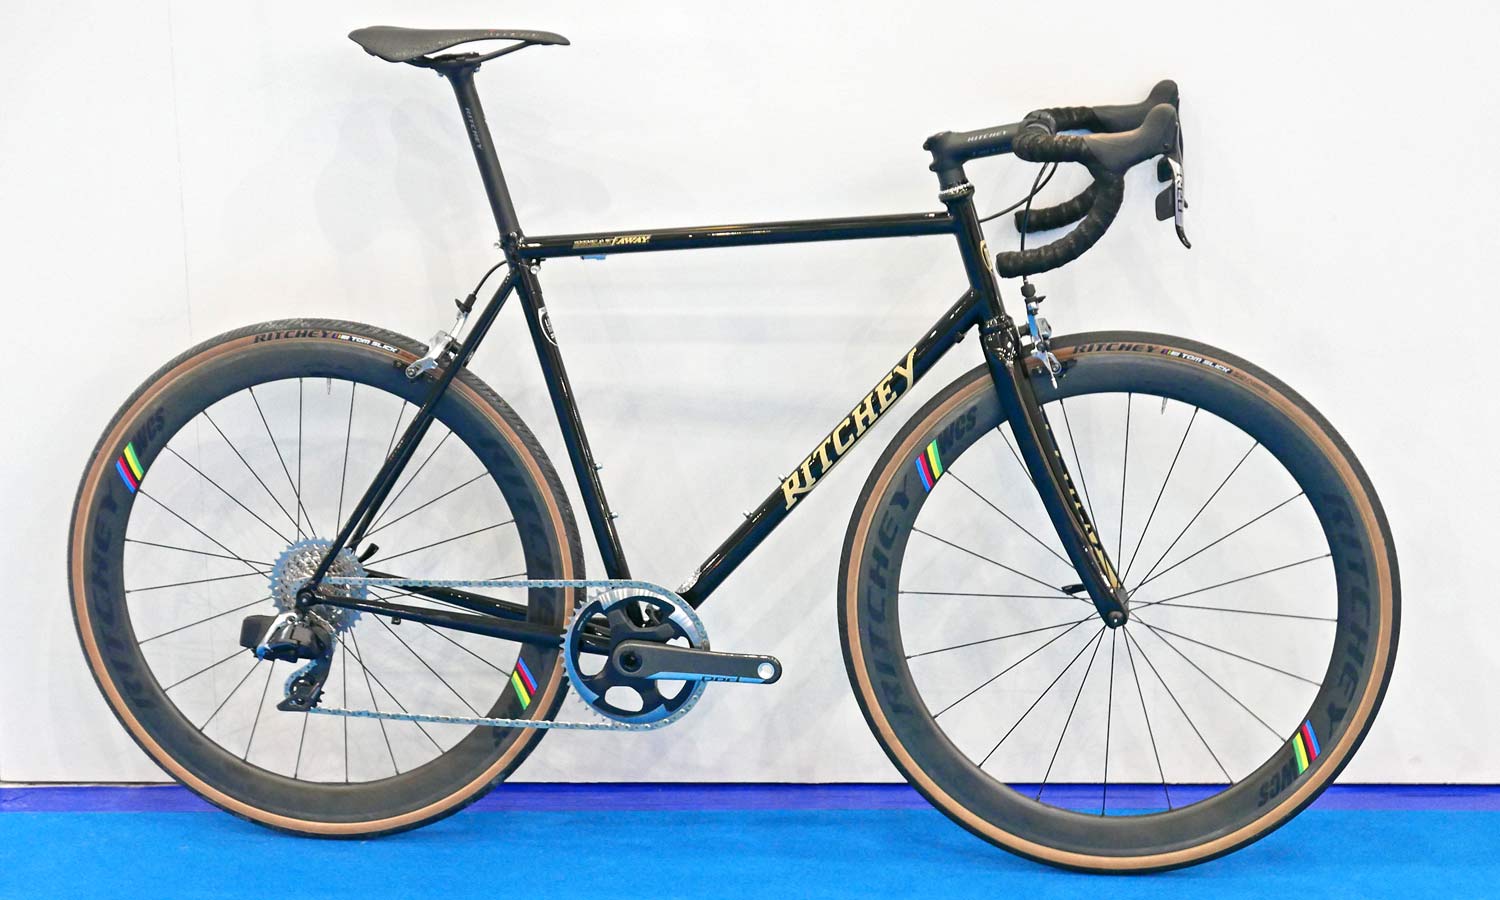 Ritchey Logic Break-Away Road, all steel frames refreshed for 2019 with a new modern look